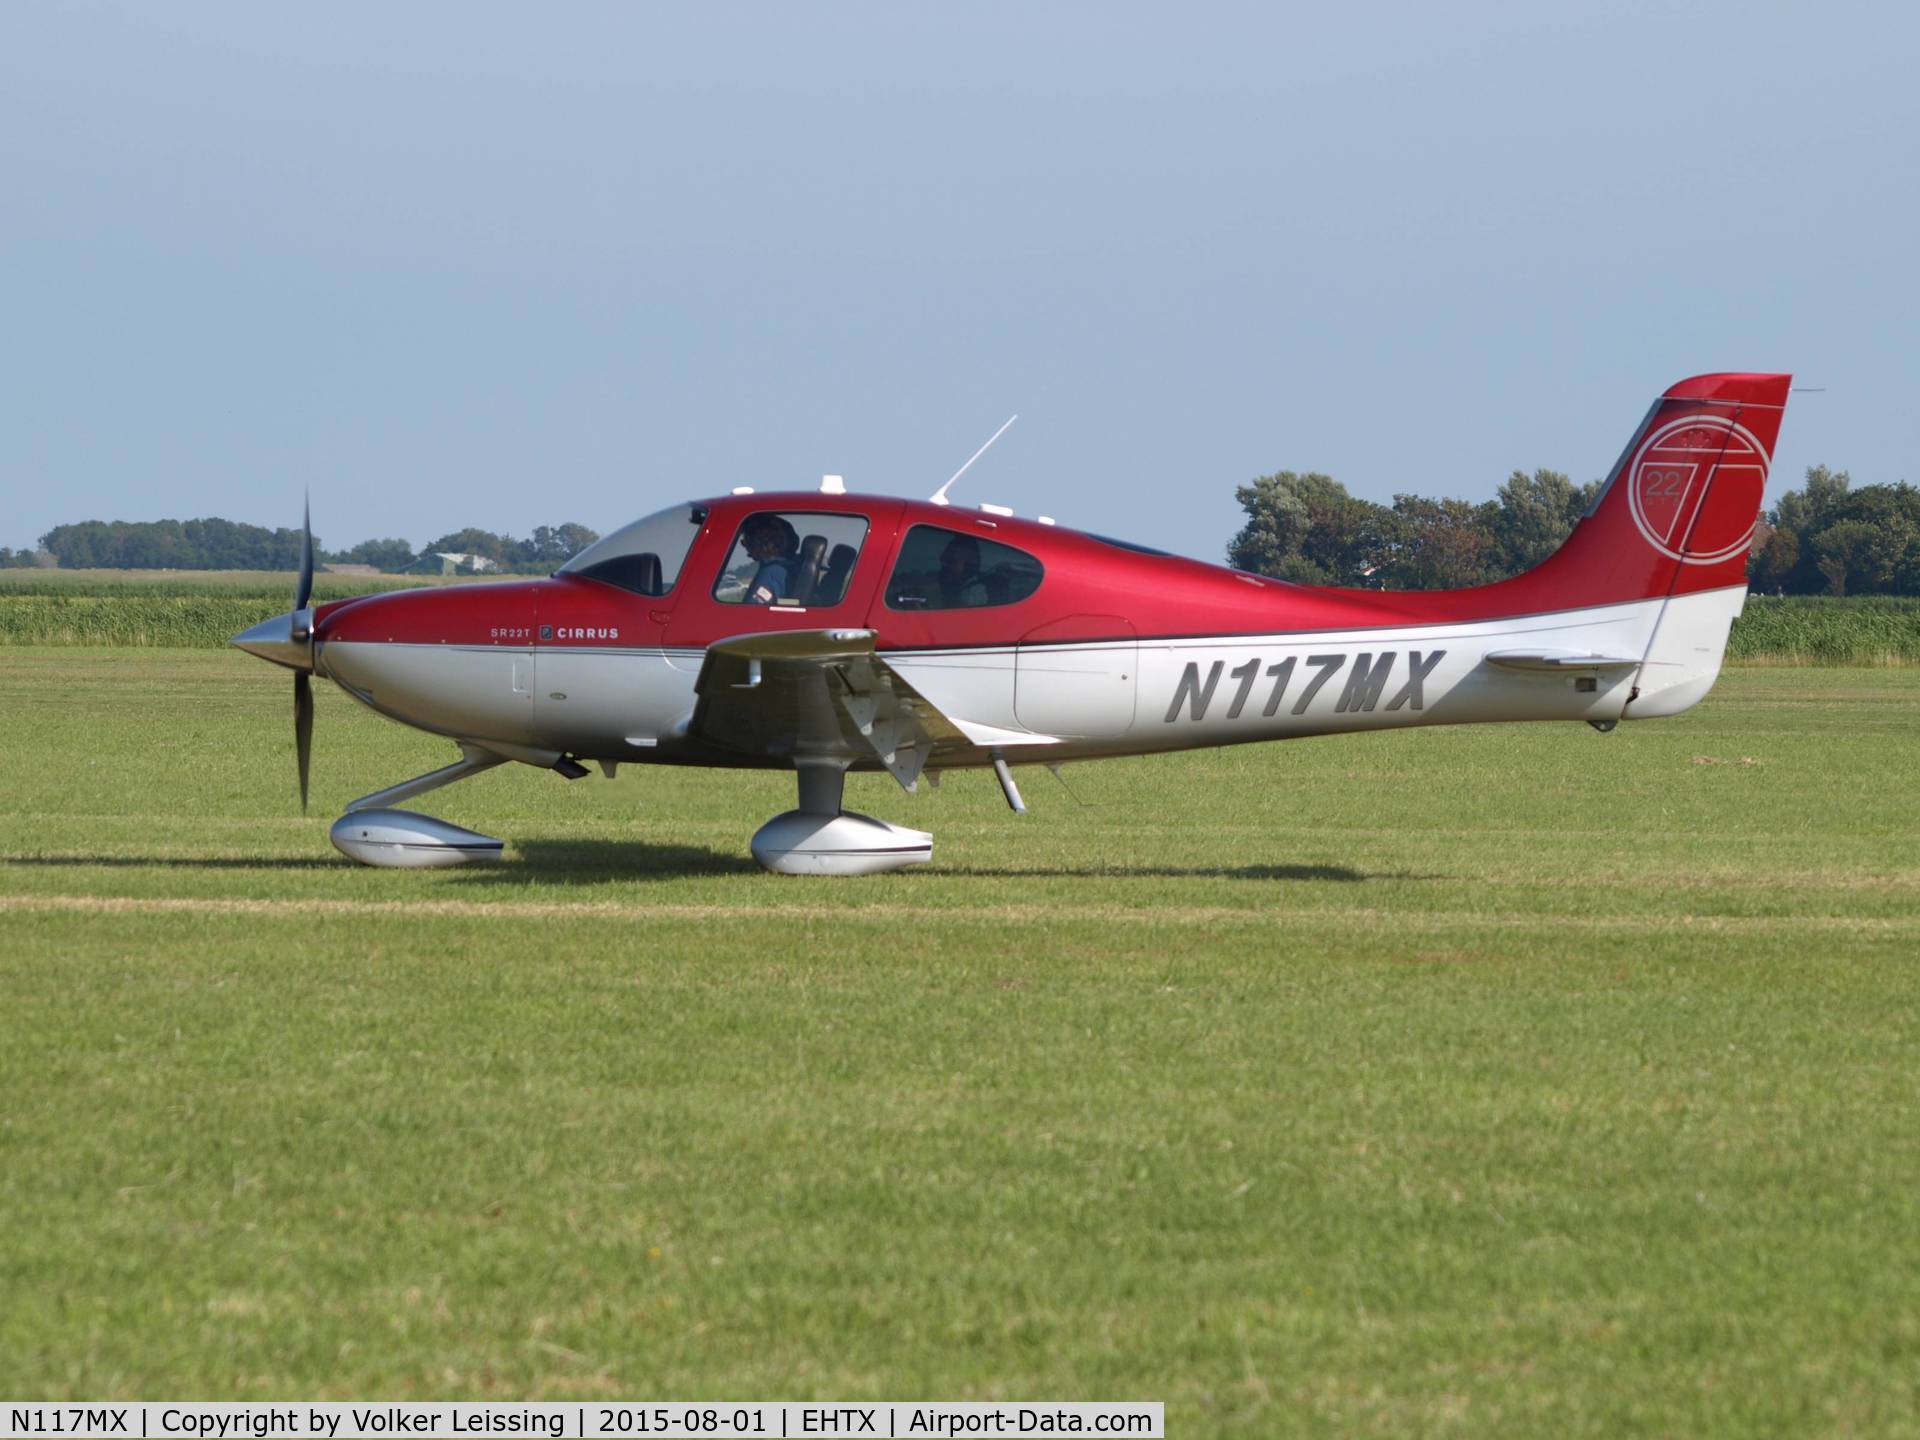 N117MX, 2011 Cirrus SR22T C/N 0177, taxi to rwy after airshow